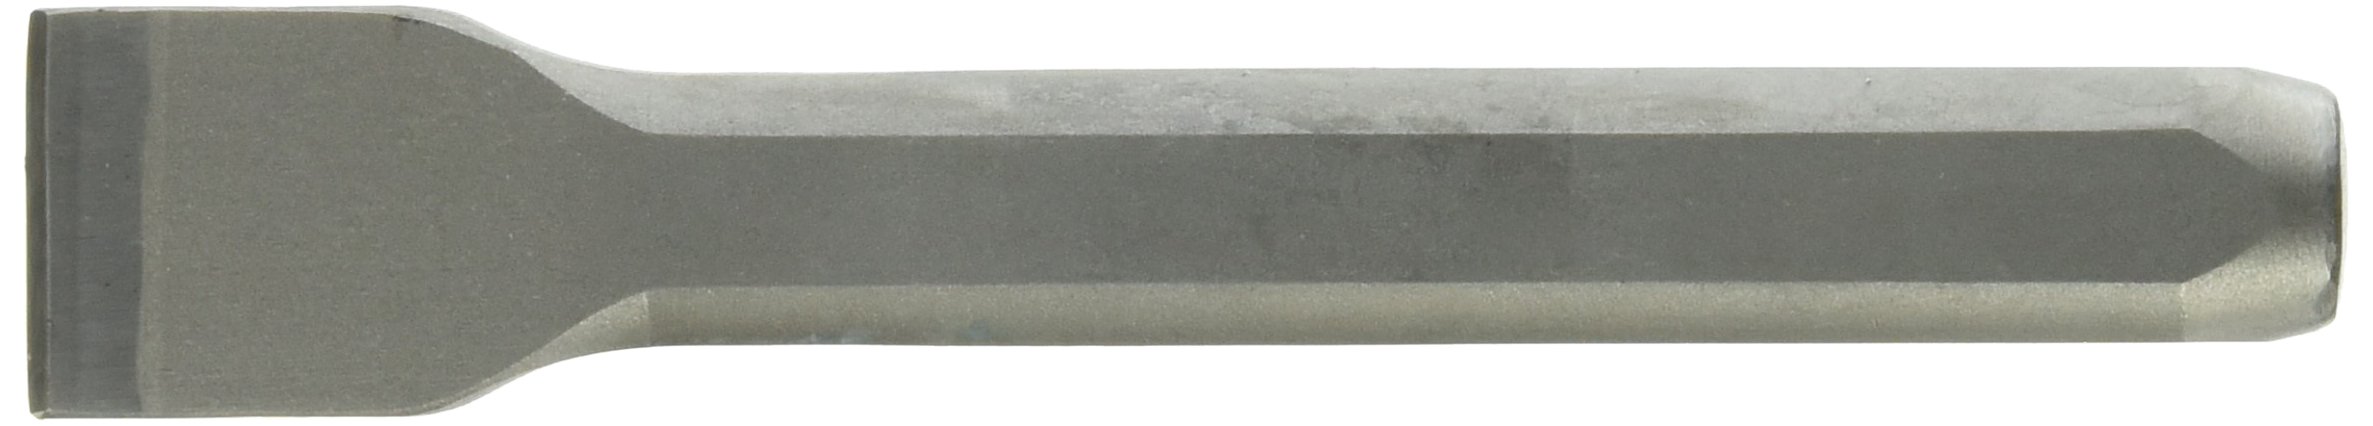 Bon 11-835 Carbide Hand Tracer with Chisel Point